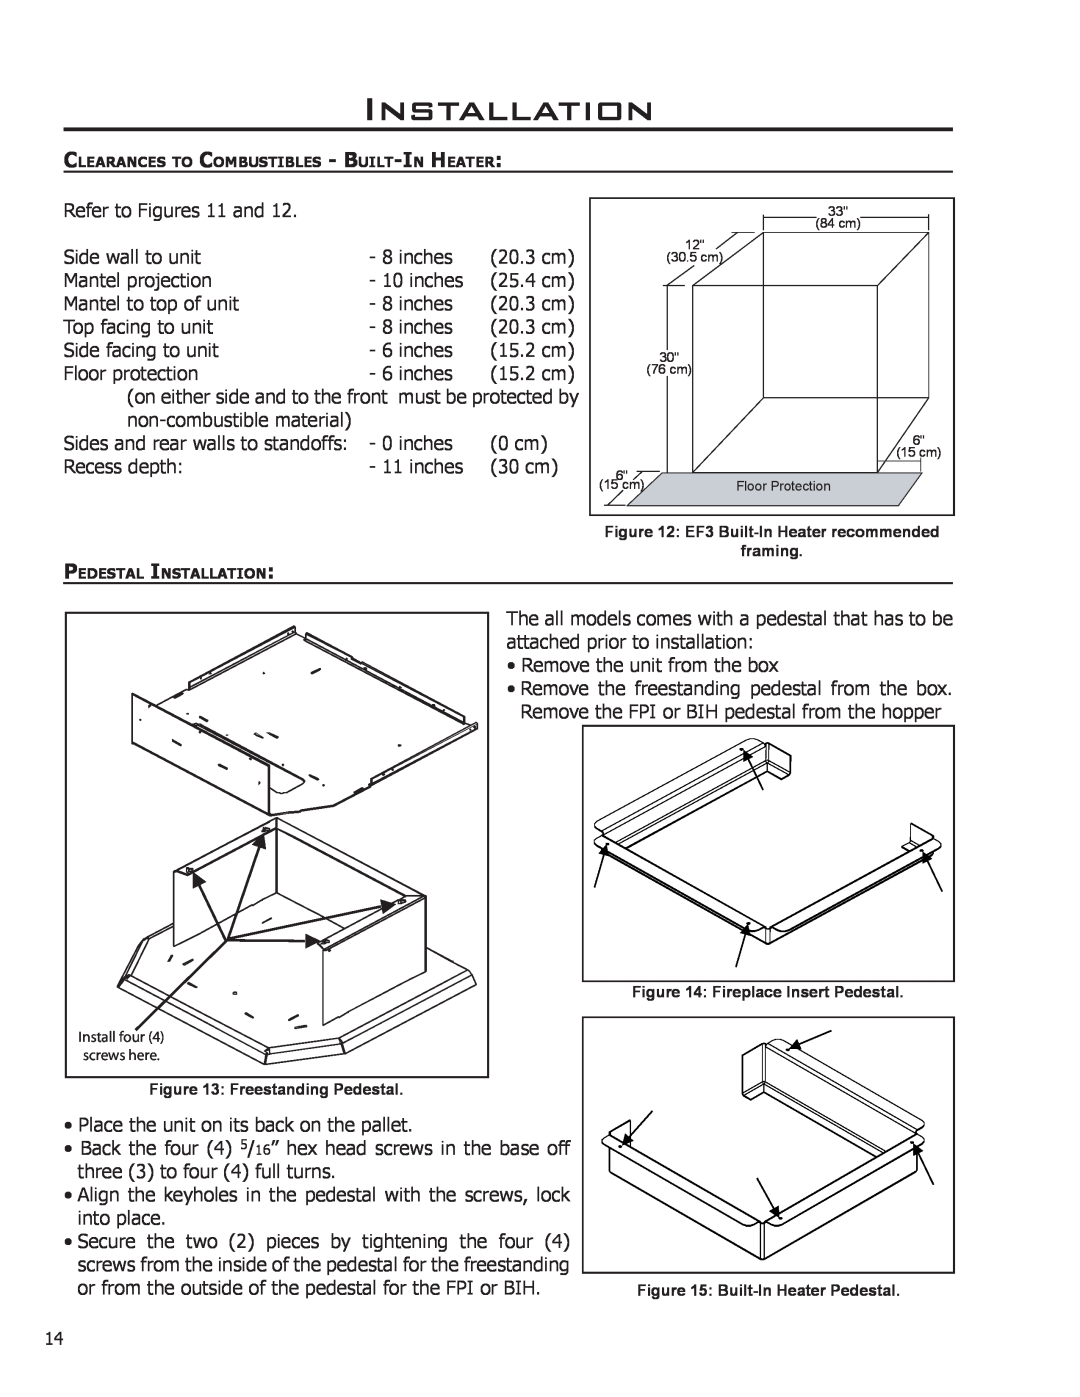 Enviro EF3 owner manual Installation, Refer to Figures 11 and 